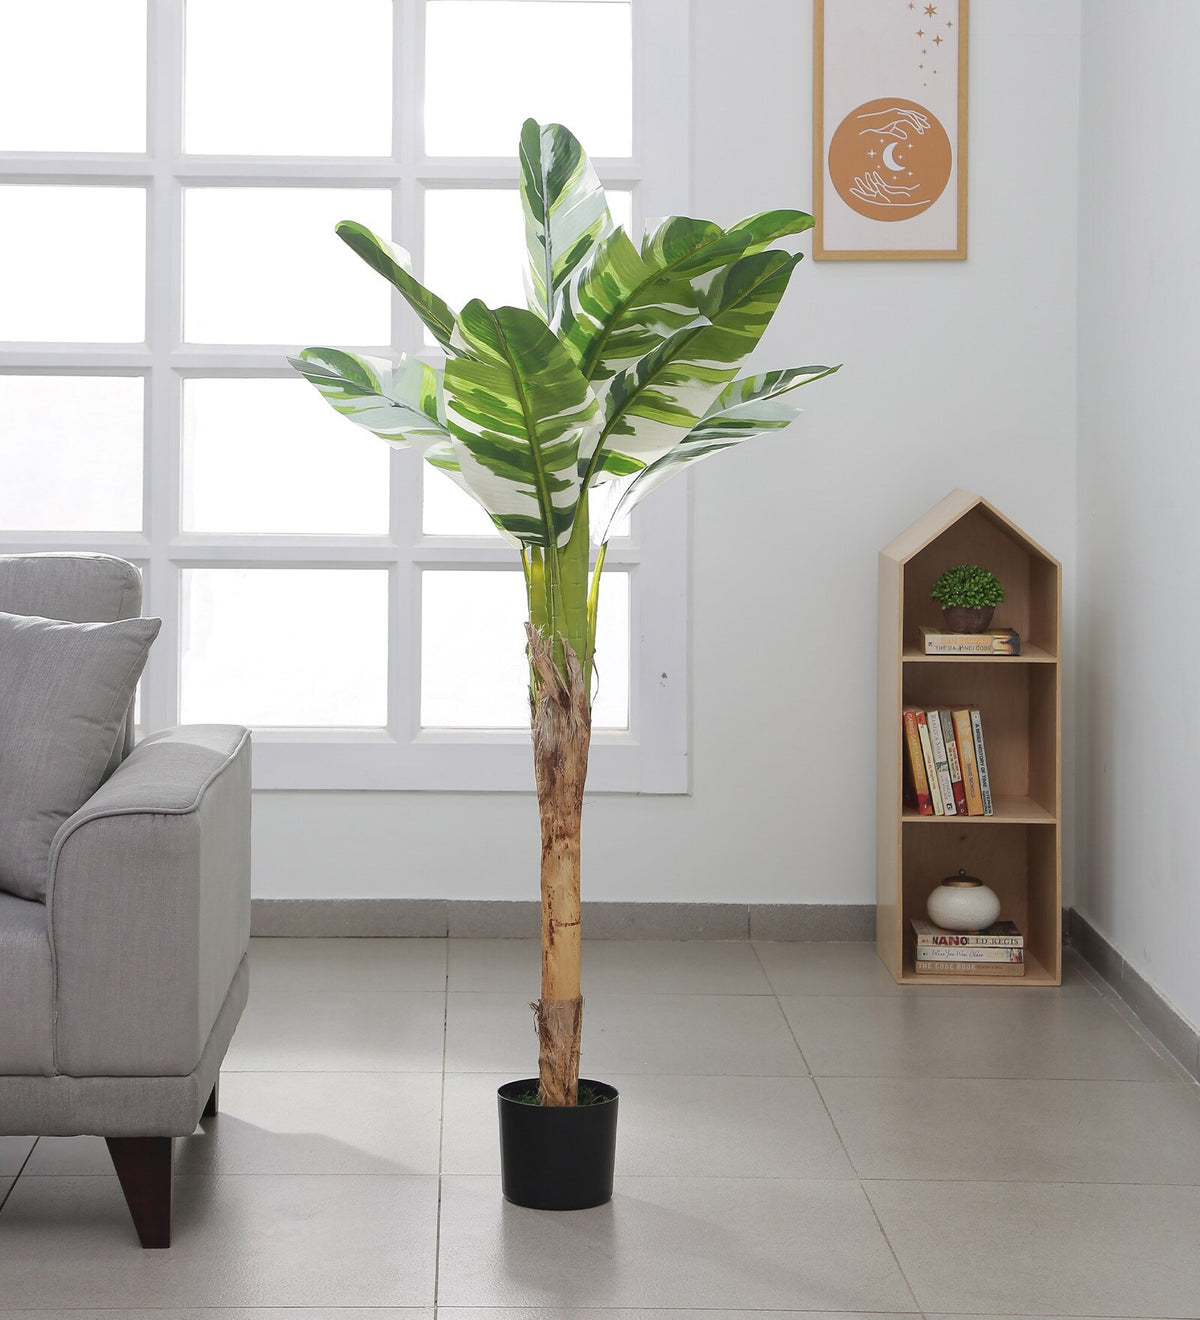 Artificial Real Touch Banana Plant in a Pot for Interior Decor/Home Decor/Office Decor (150 cm Tall, Green/White)